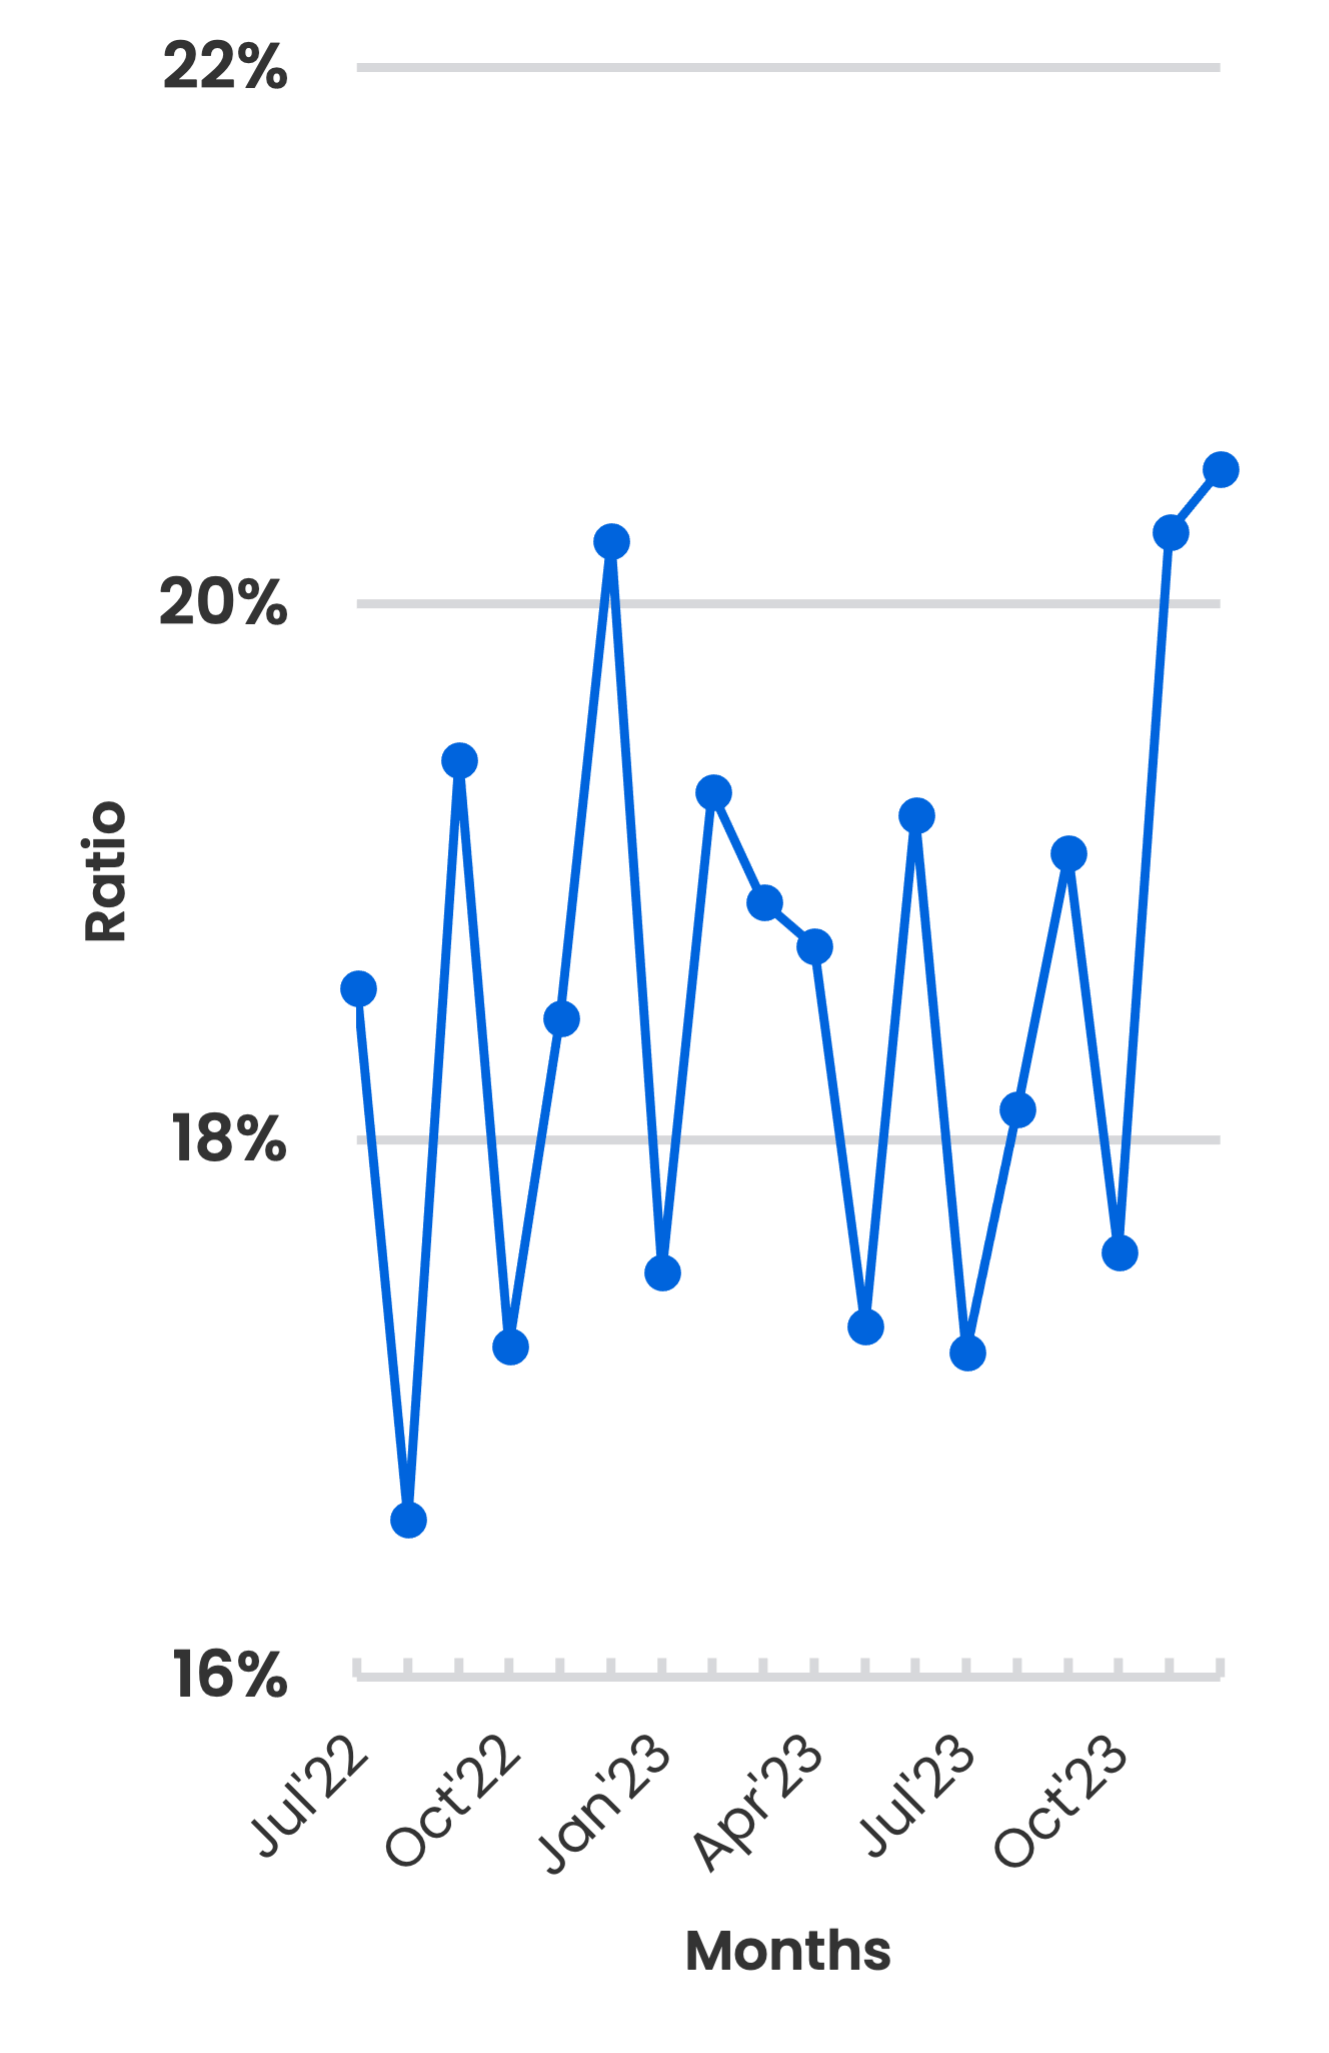 Line graph showing the payroll-to-revenue ratio (Y-axis) reported by small businesses over time by months (X-axis). The line generally displays a varied line, between a 16% and 20% revenue-to-expense ratio over 18 months, that is higher than 20% the last two months.